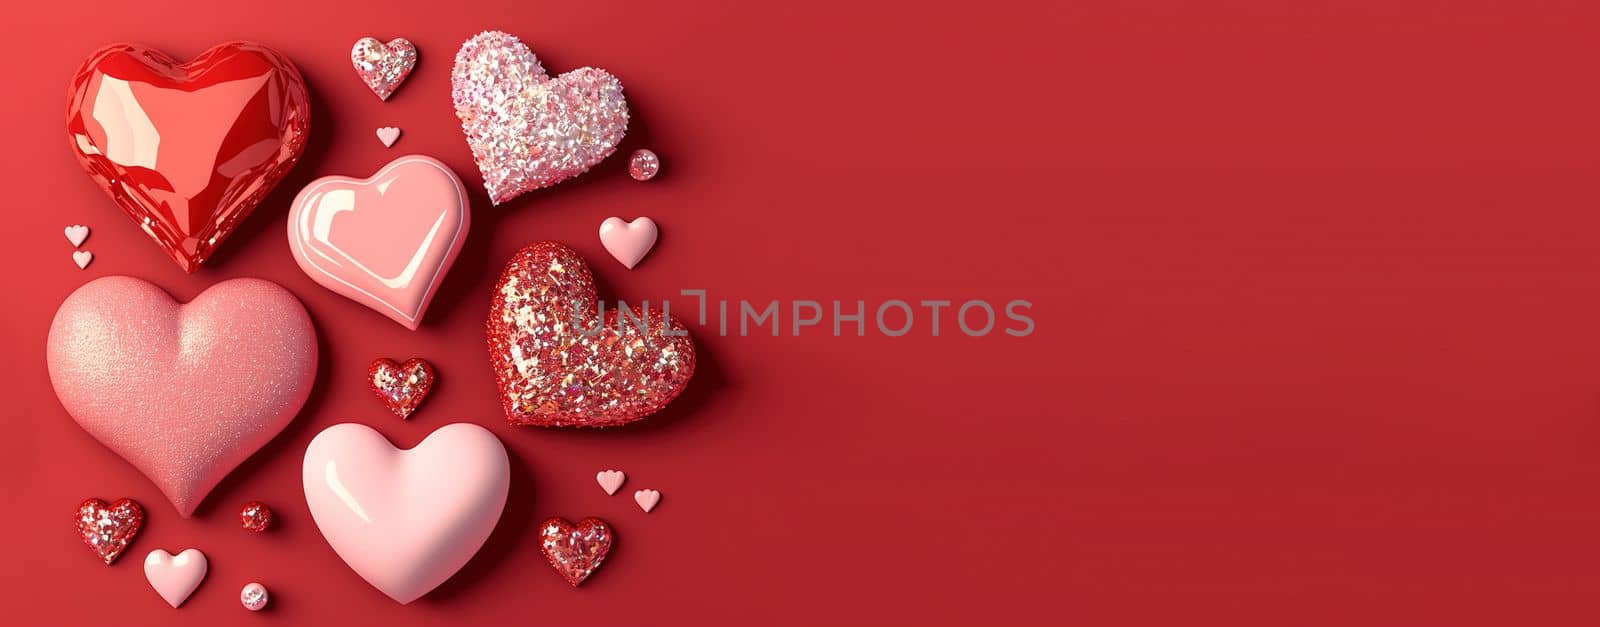 Gorgeous 3D Heart Shape, Diamond, and Crystal Illustration for Valentine's Day Banner by templator